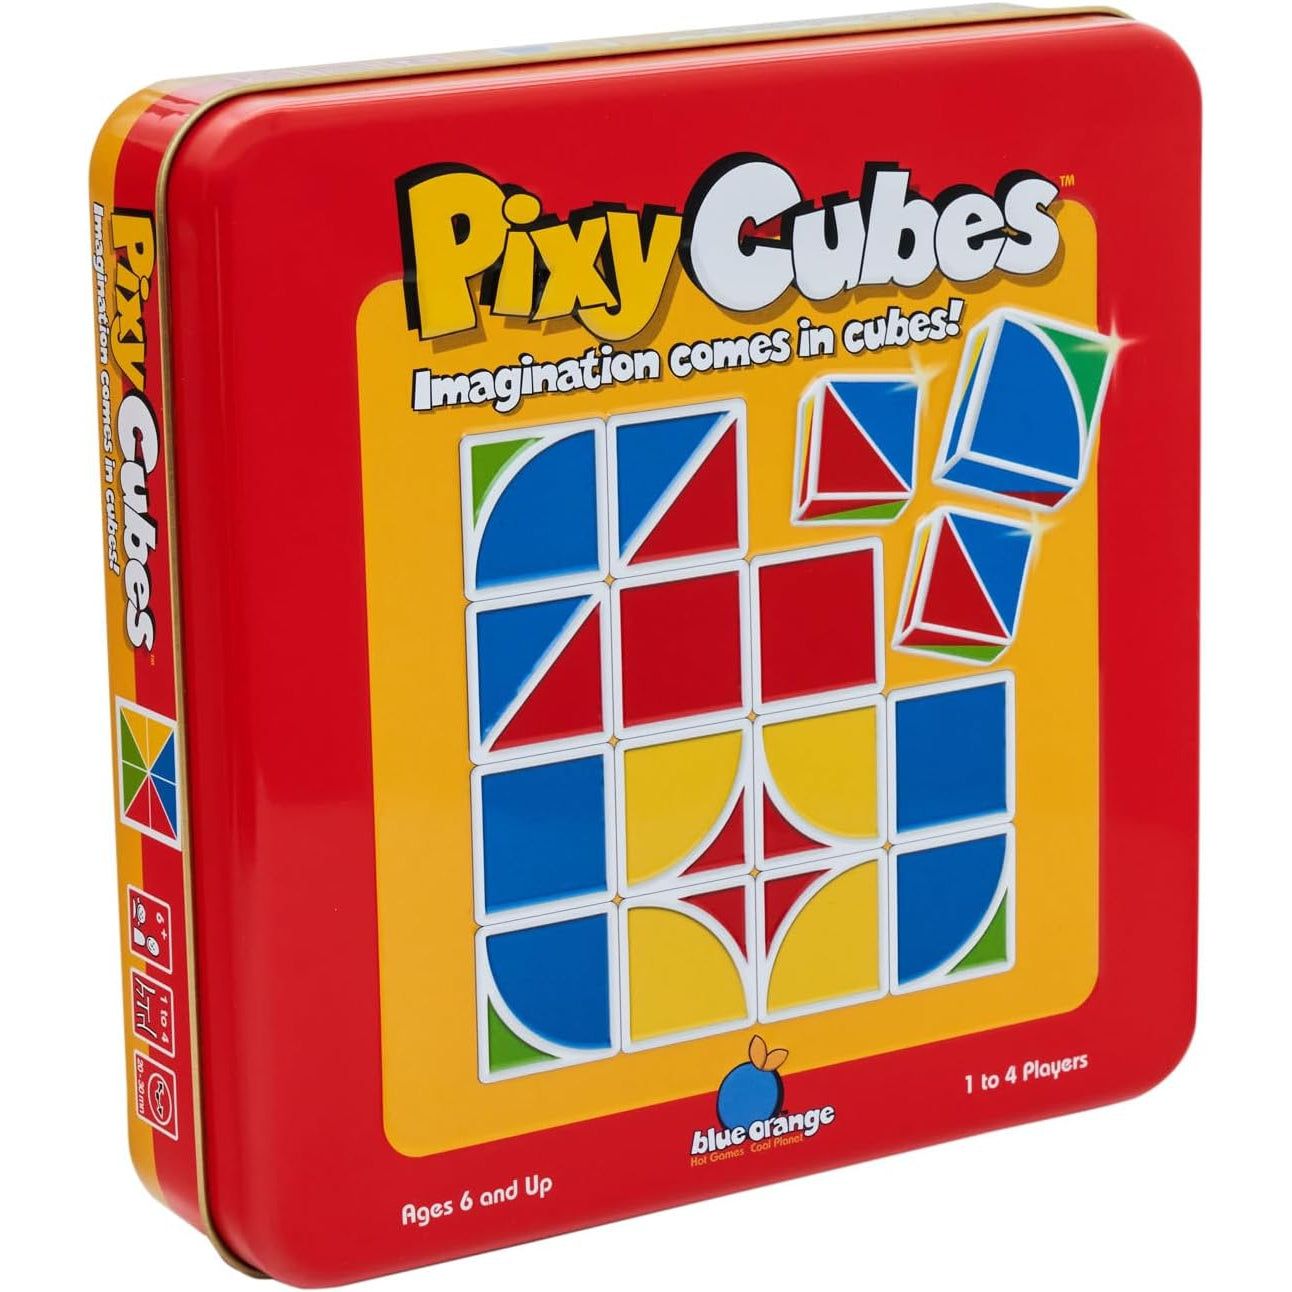 Cube 2048 - Play Cube 2048 On Foodle